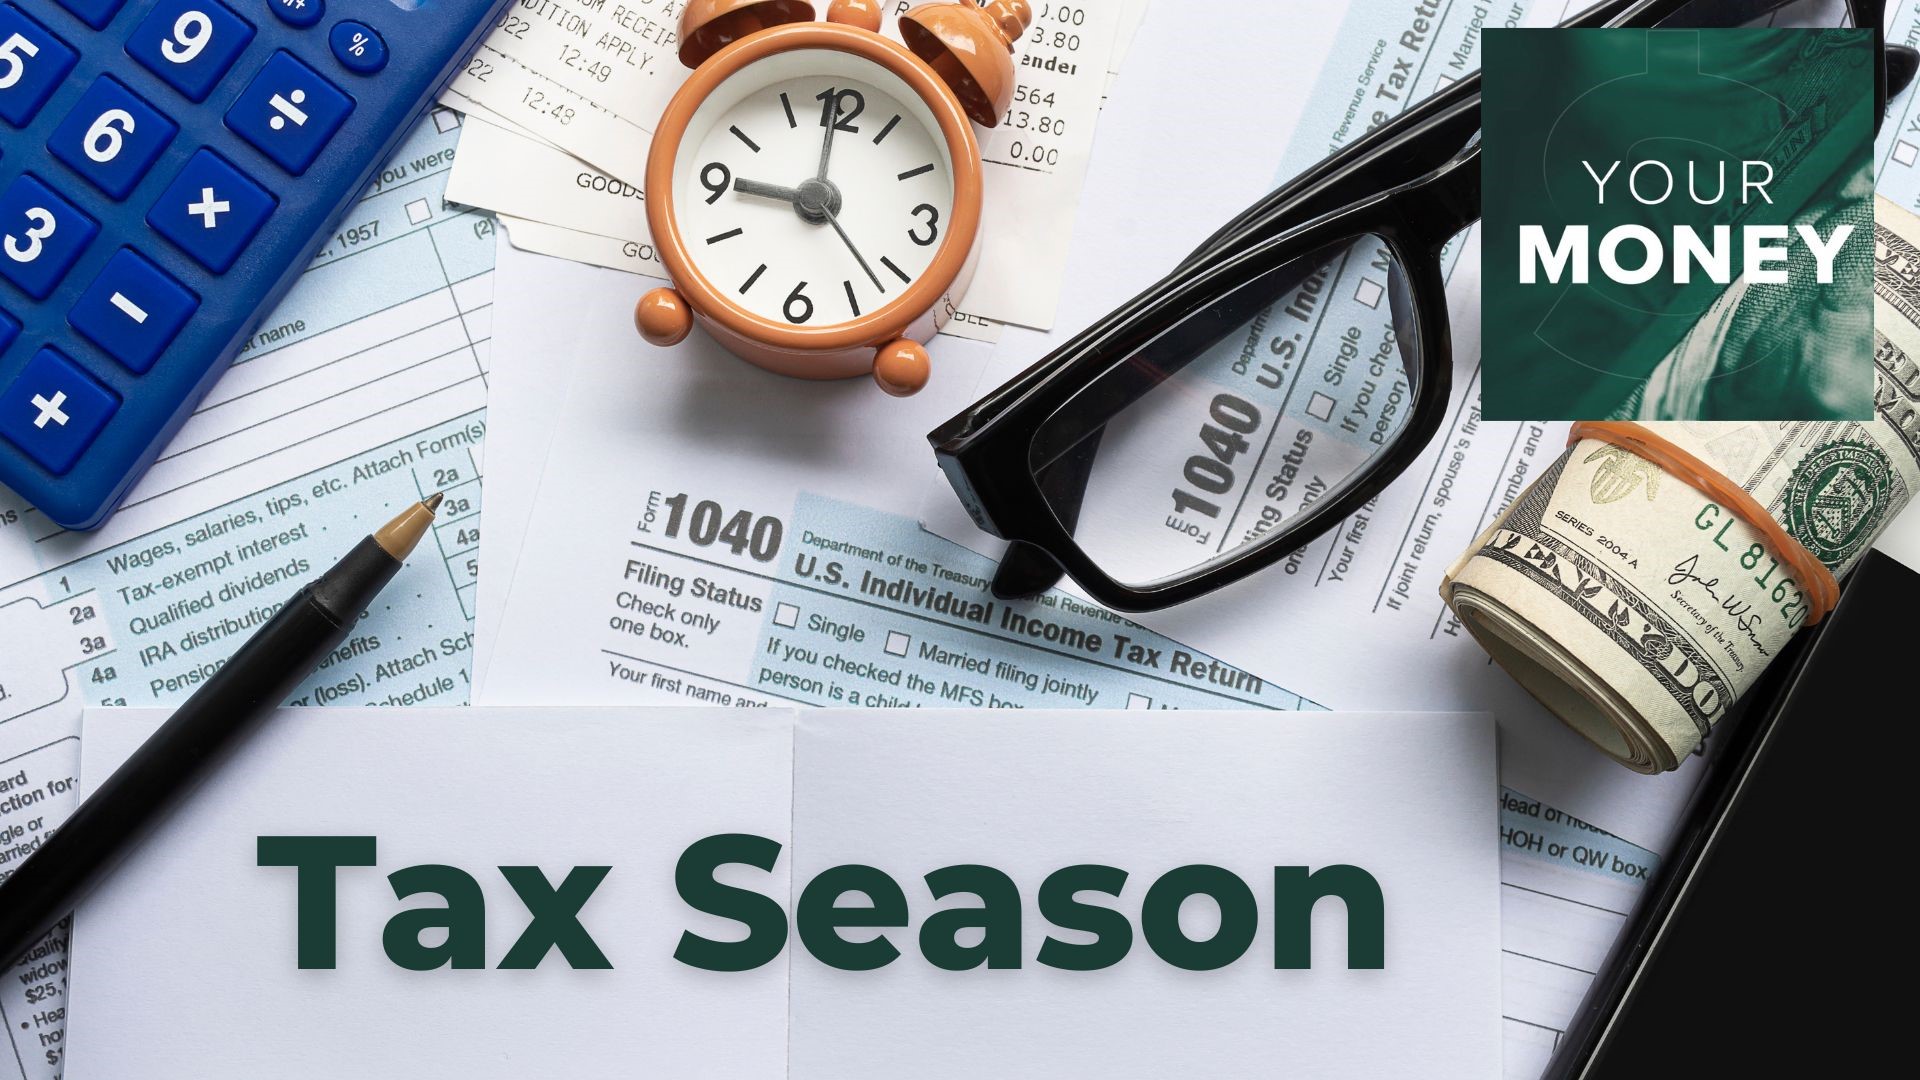 It is tax season! Gordon Severson shares expert advice on how to maximize refunds as well as tips on avoiding tax scams. Plus, why returns may be smaller this year.